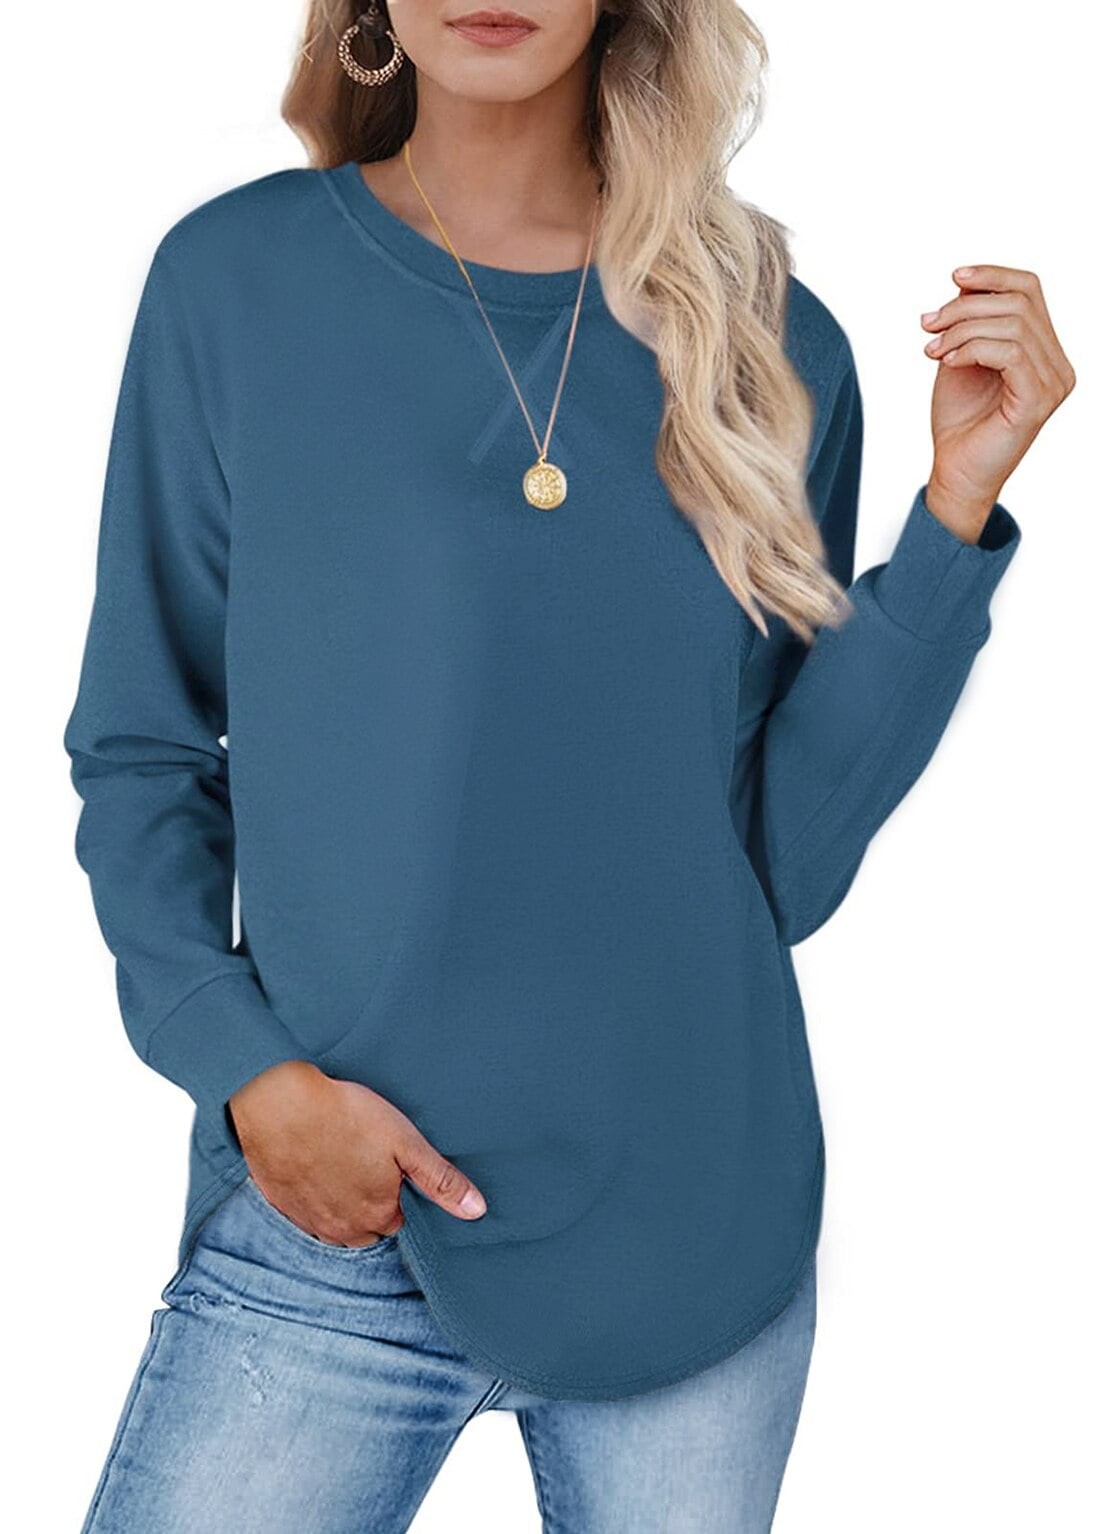 Fantaslook Long Sleeve Shirts for Women Crew Neck Casual Tunic Tops  Lightweight Pullover